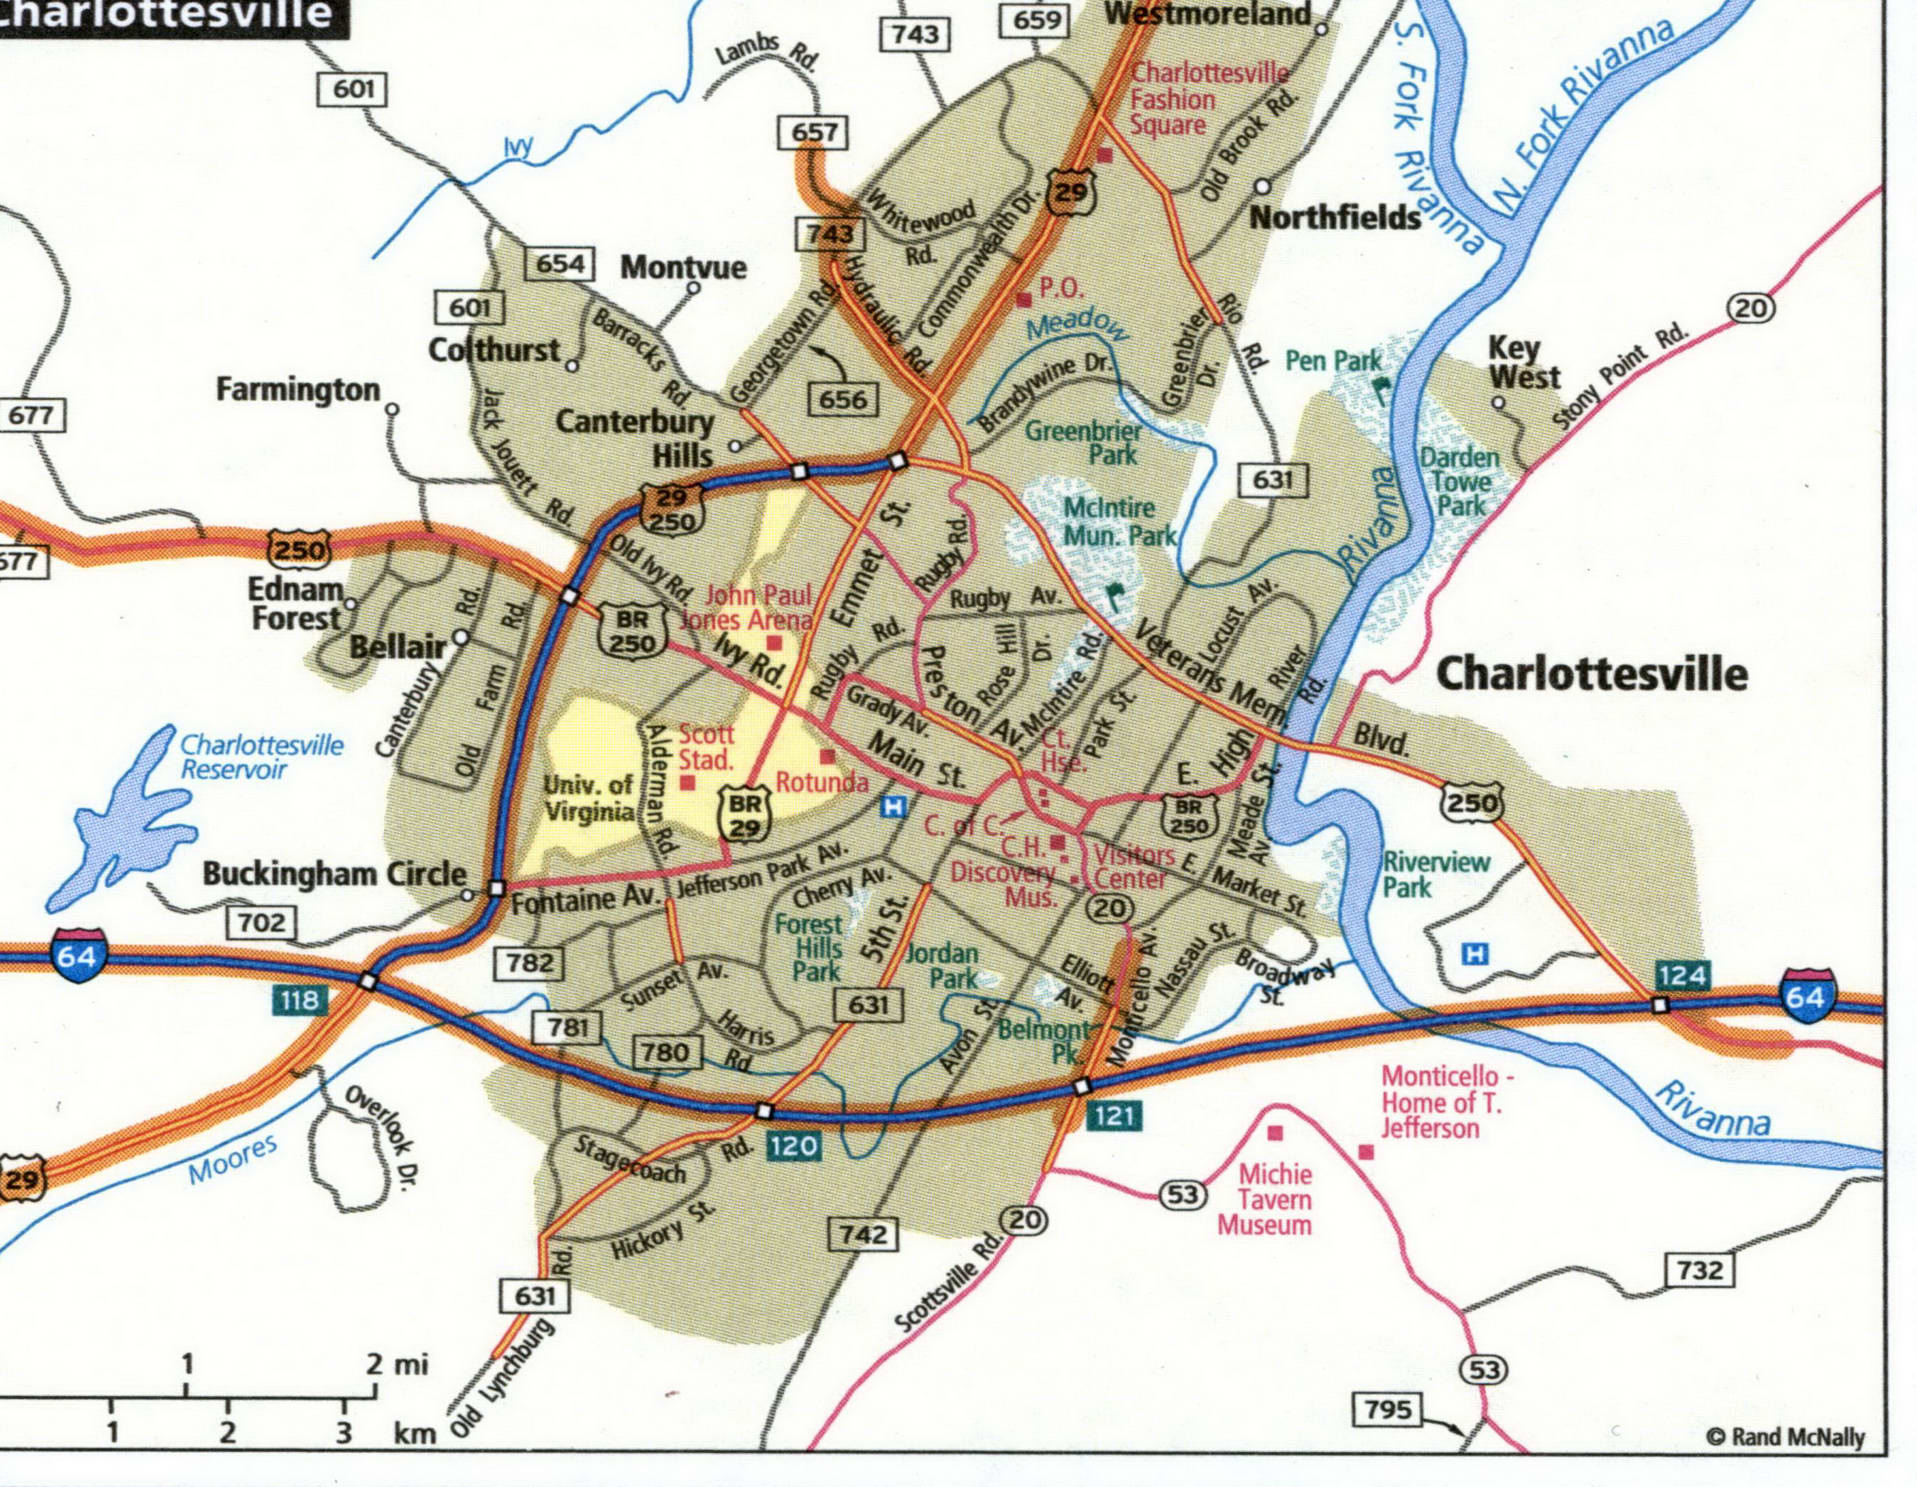 Charlottesville city map for truckers